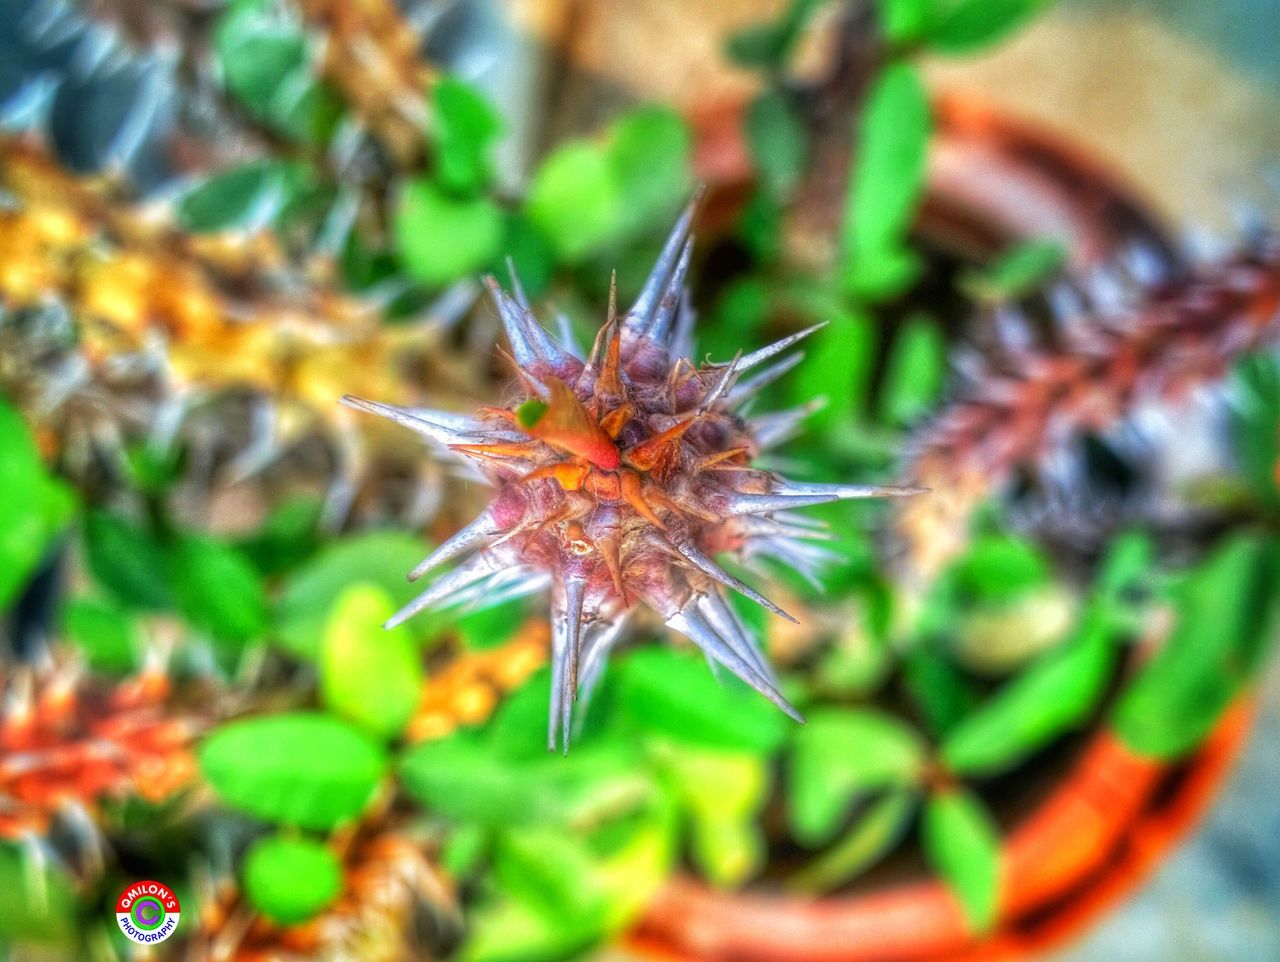 close-up, growth, leaf, plant, focus on foreground, freshness, selective focus, green color, nature, thorn, spiked, cactus, potted plant, food and drink, beauty in nature, fragility, flower, stem, no people, botany